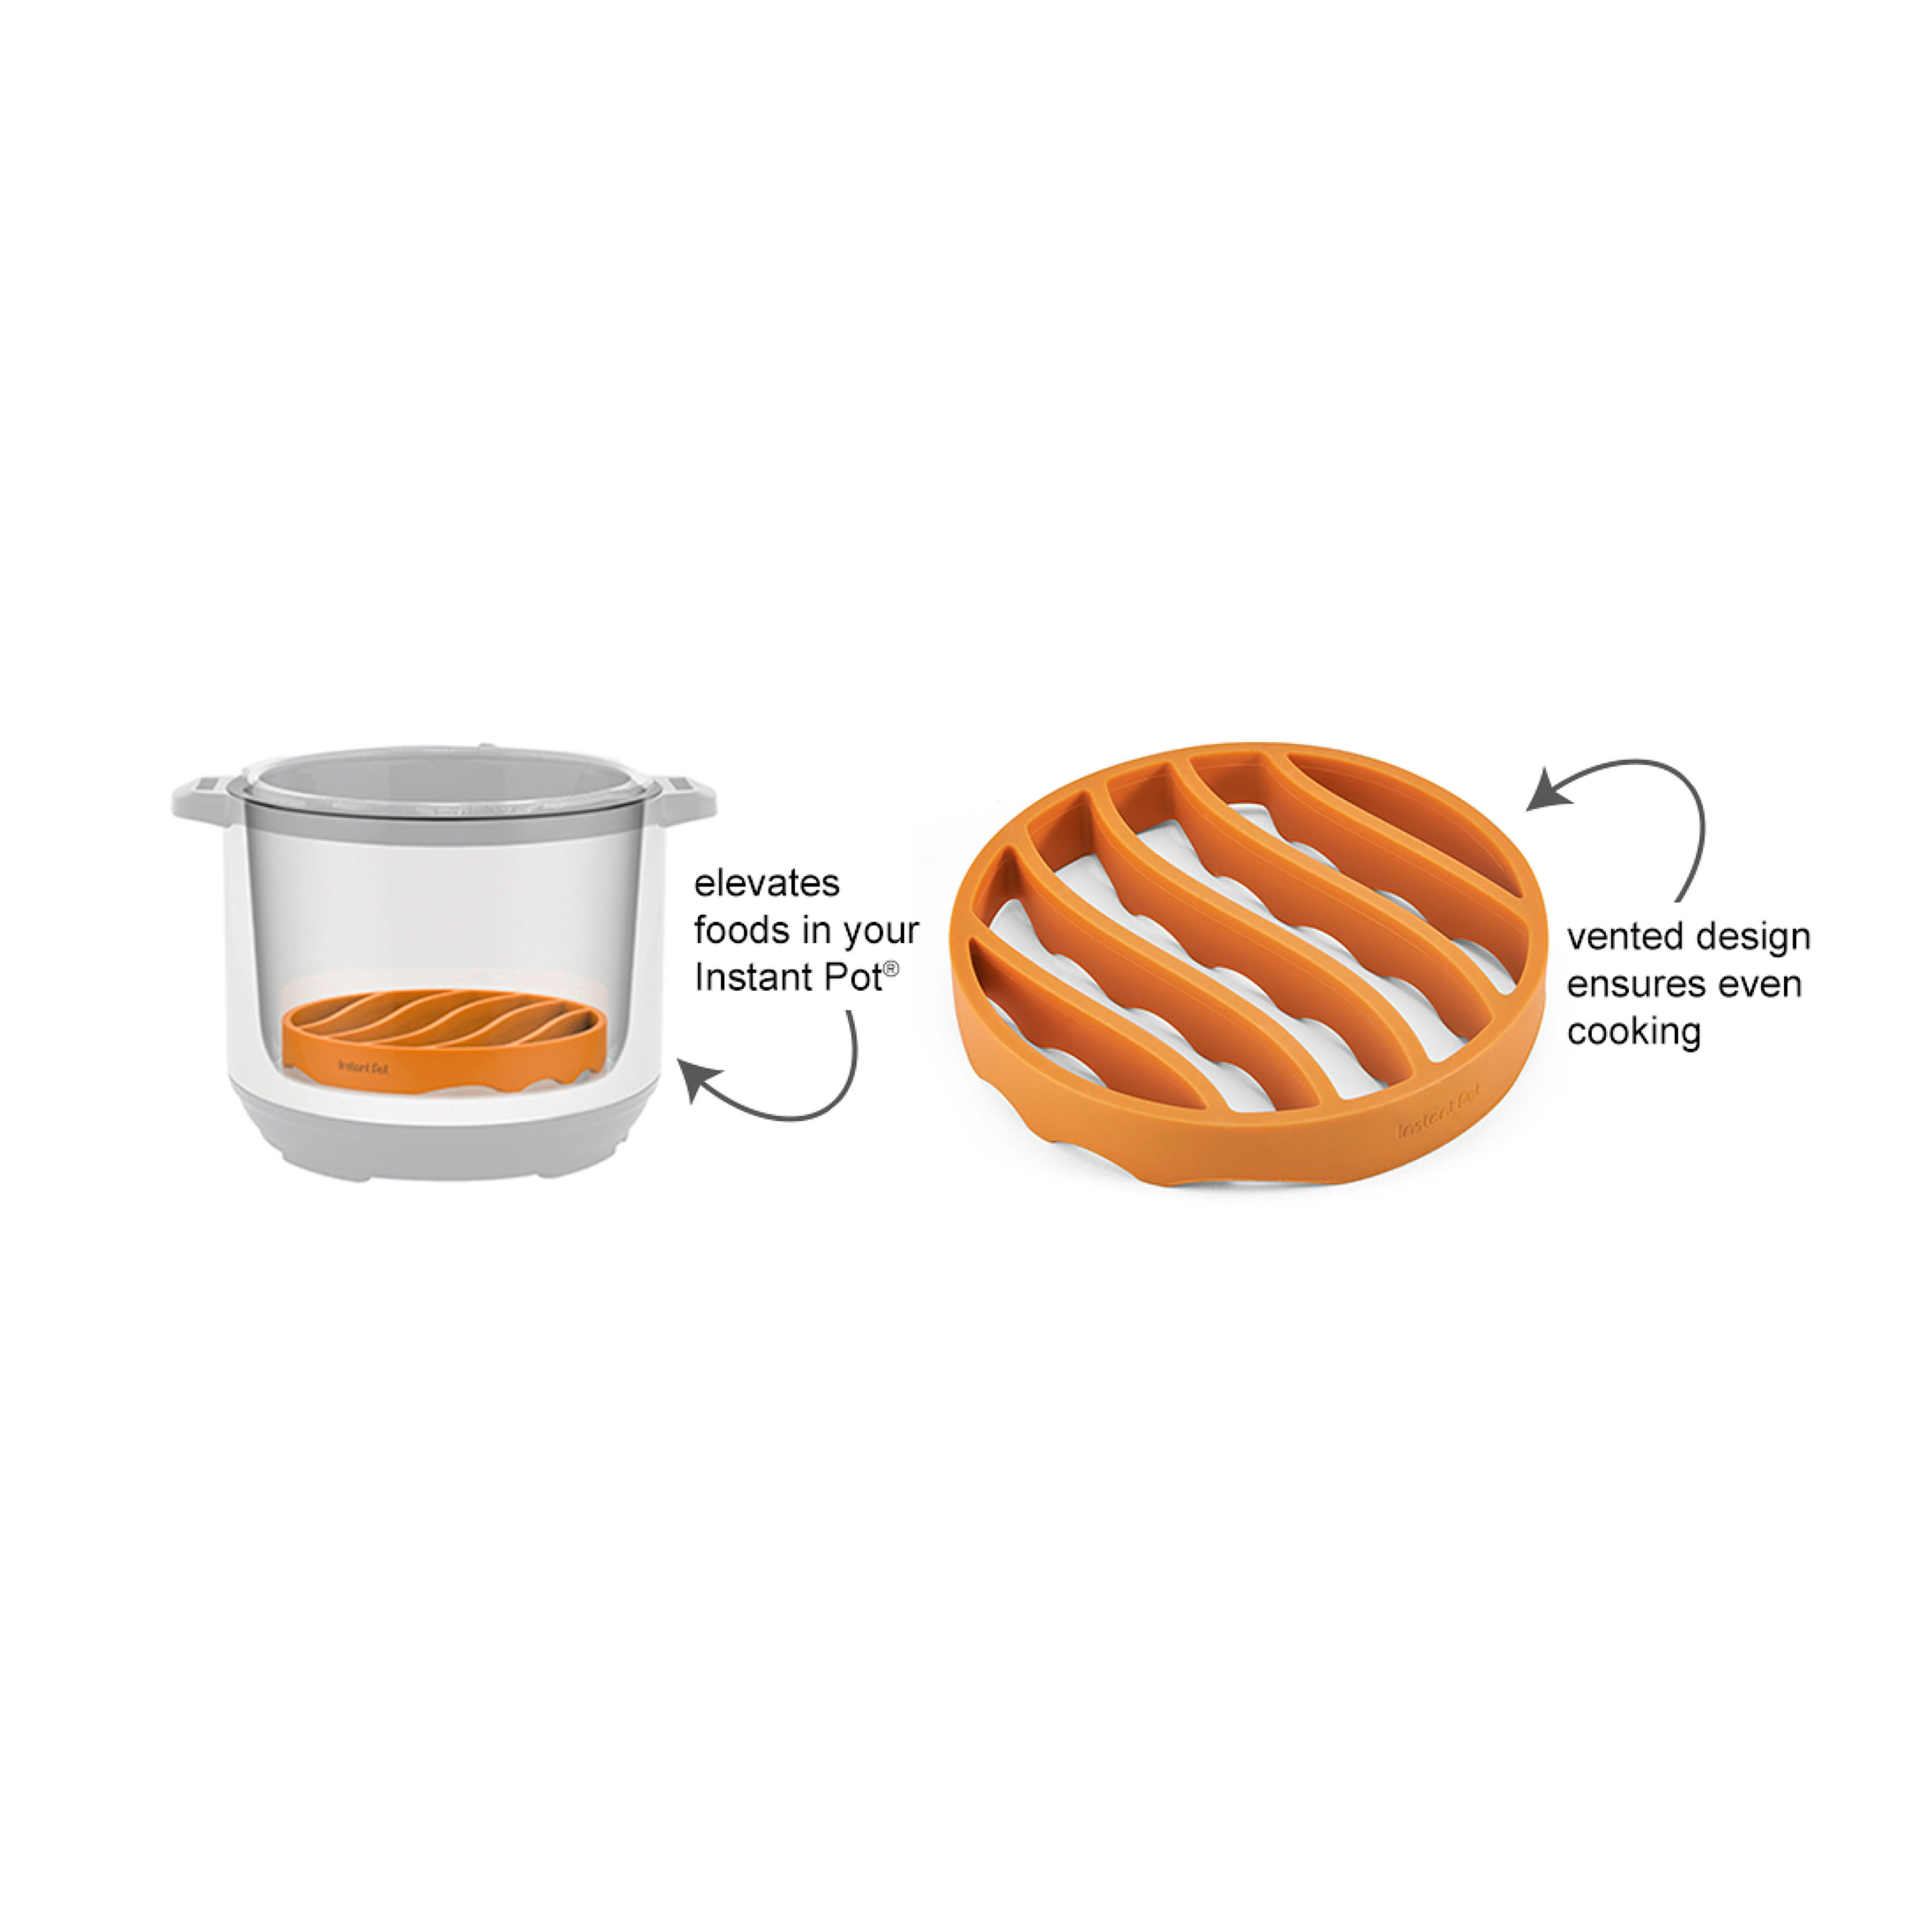 Instant Pot Roasting Rack Official Silicone Accessory, Compatible with 6-quart and 8-quart Cookers in Orange - image 5 of 10